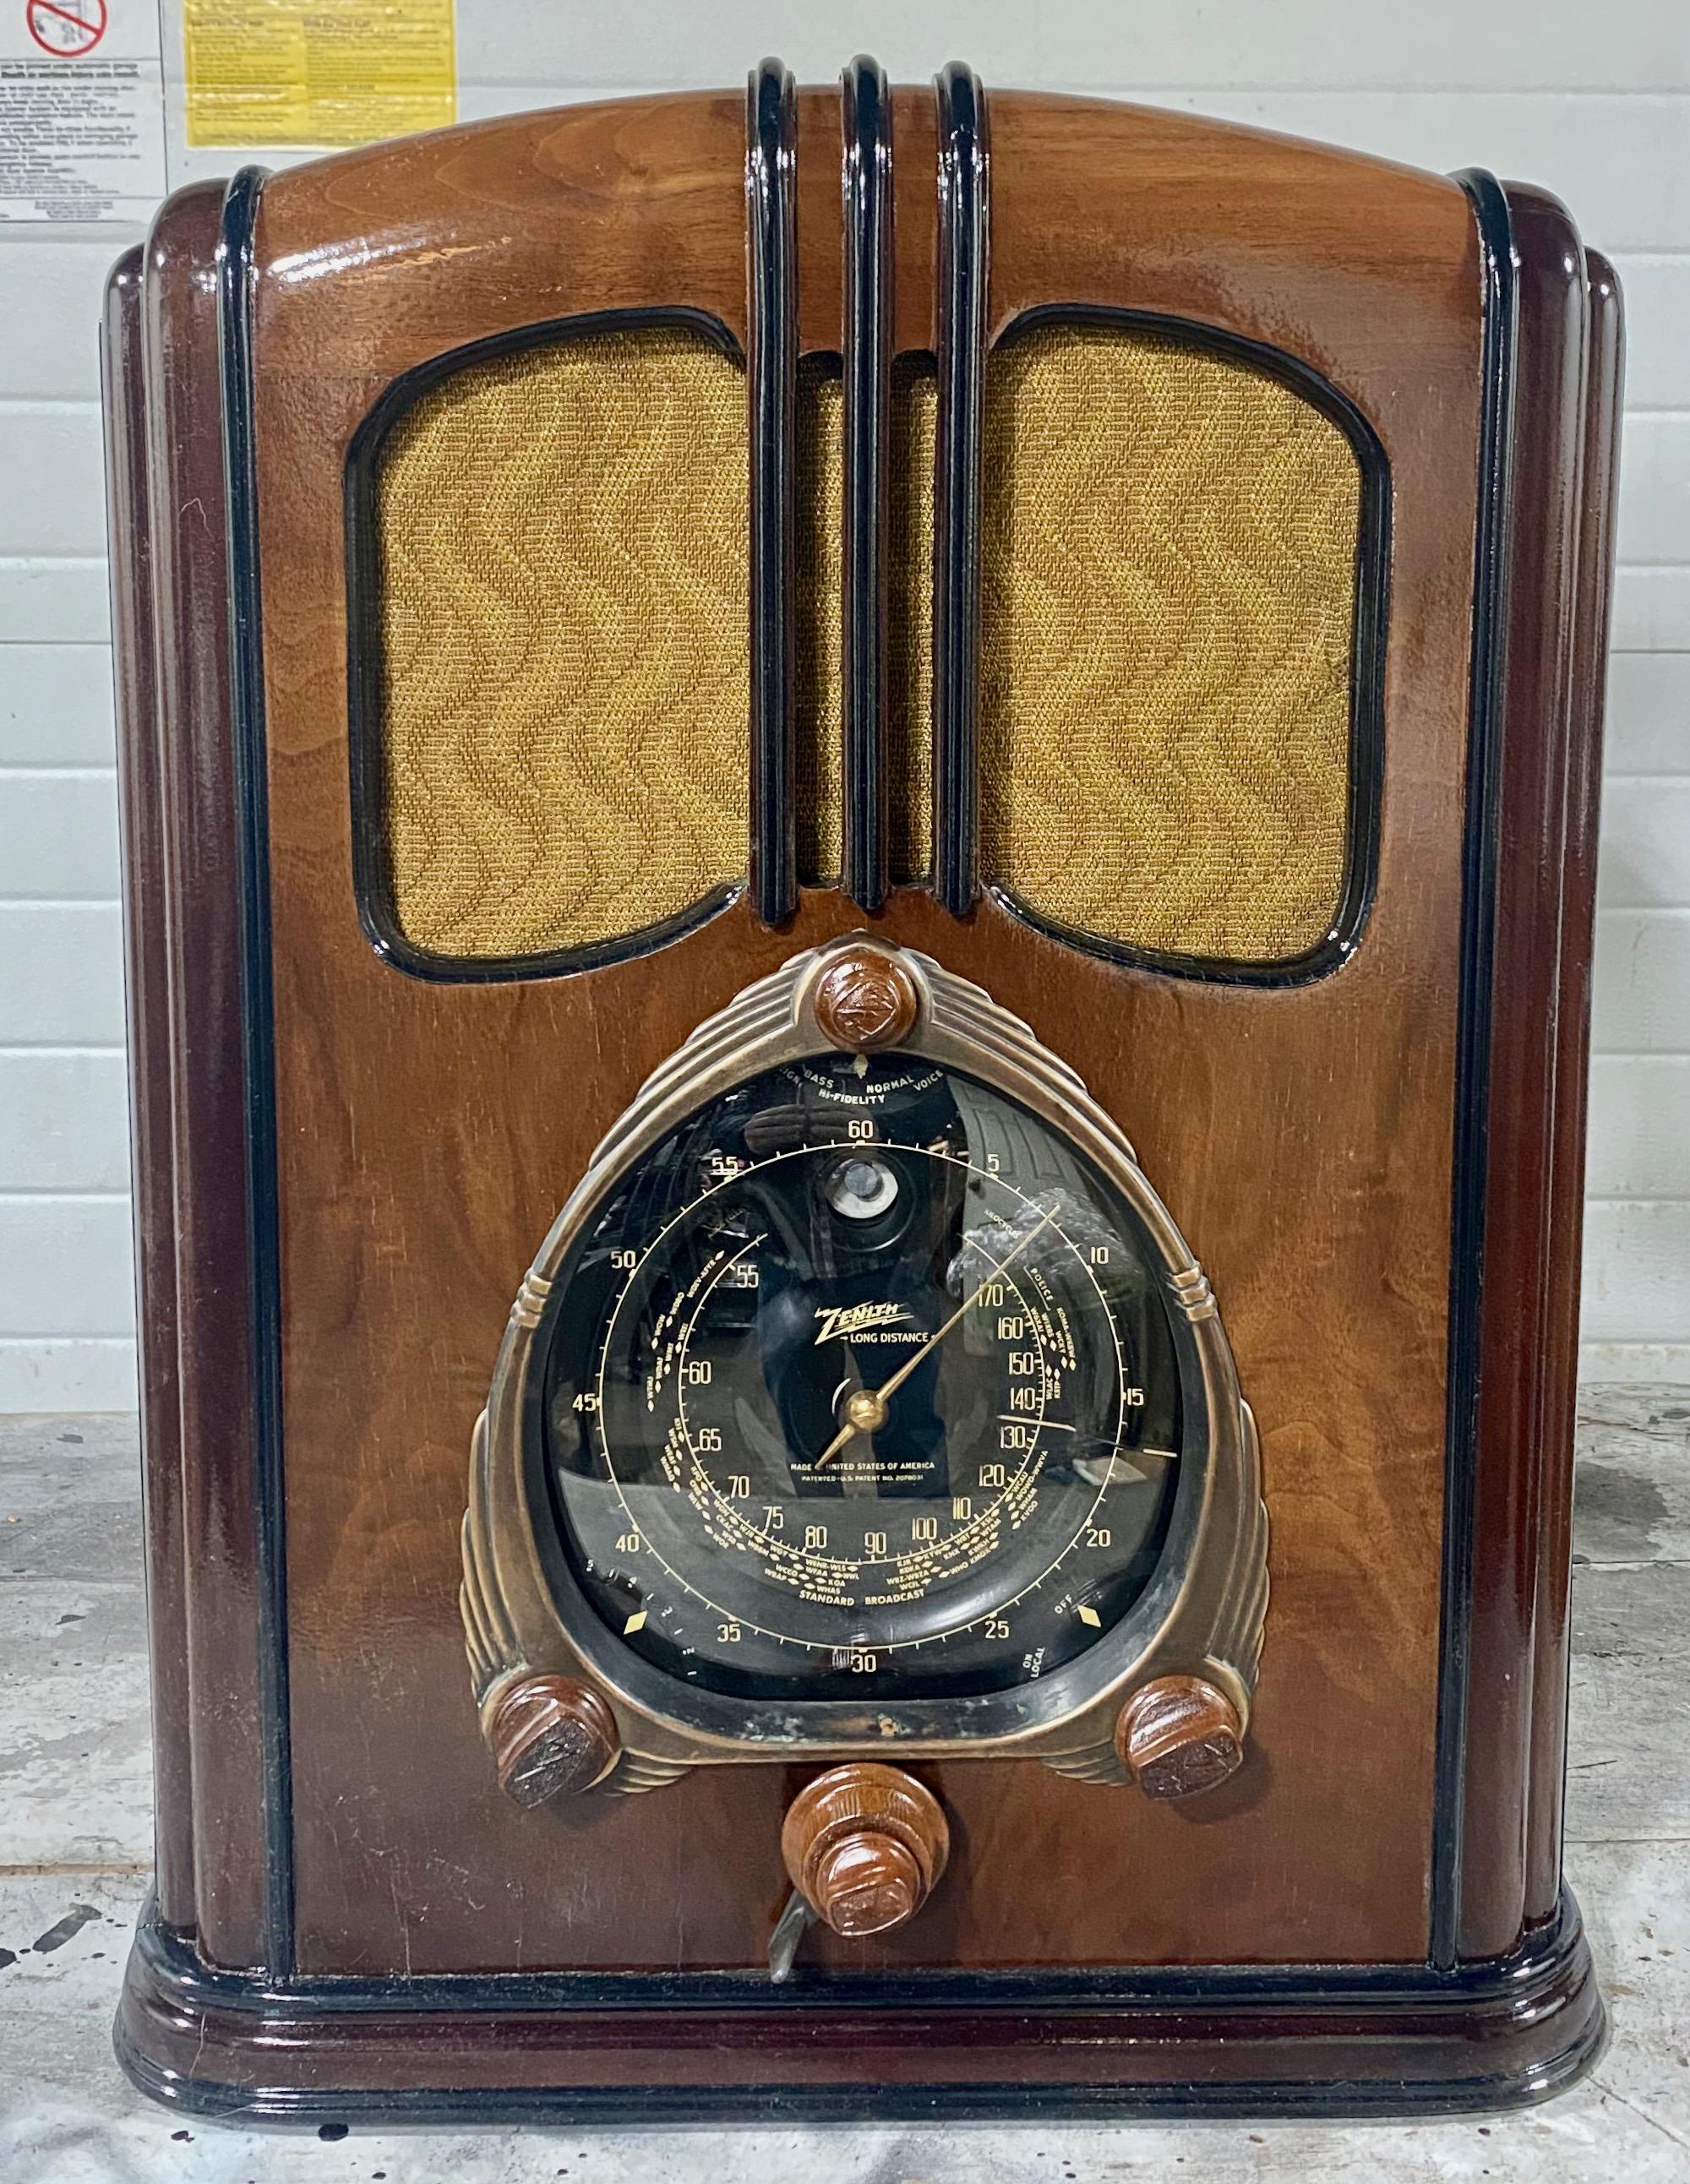 New Clock with Tube Radio Style Old Antique Style Zenith Black Dial Wood Clock 